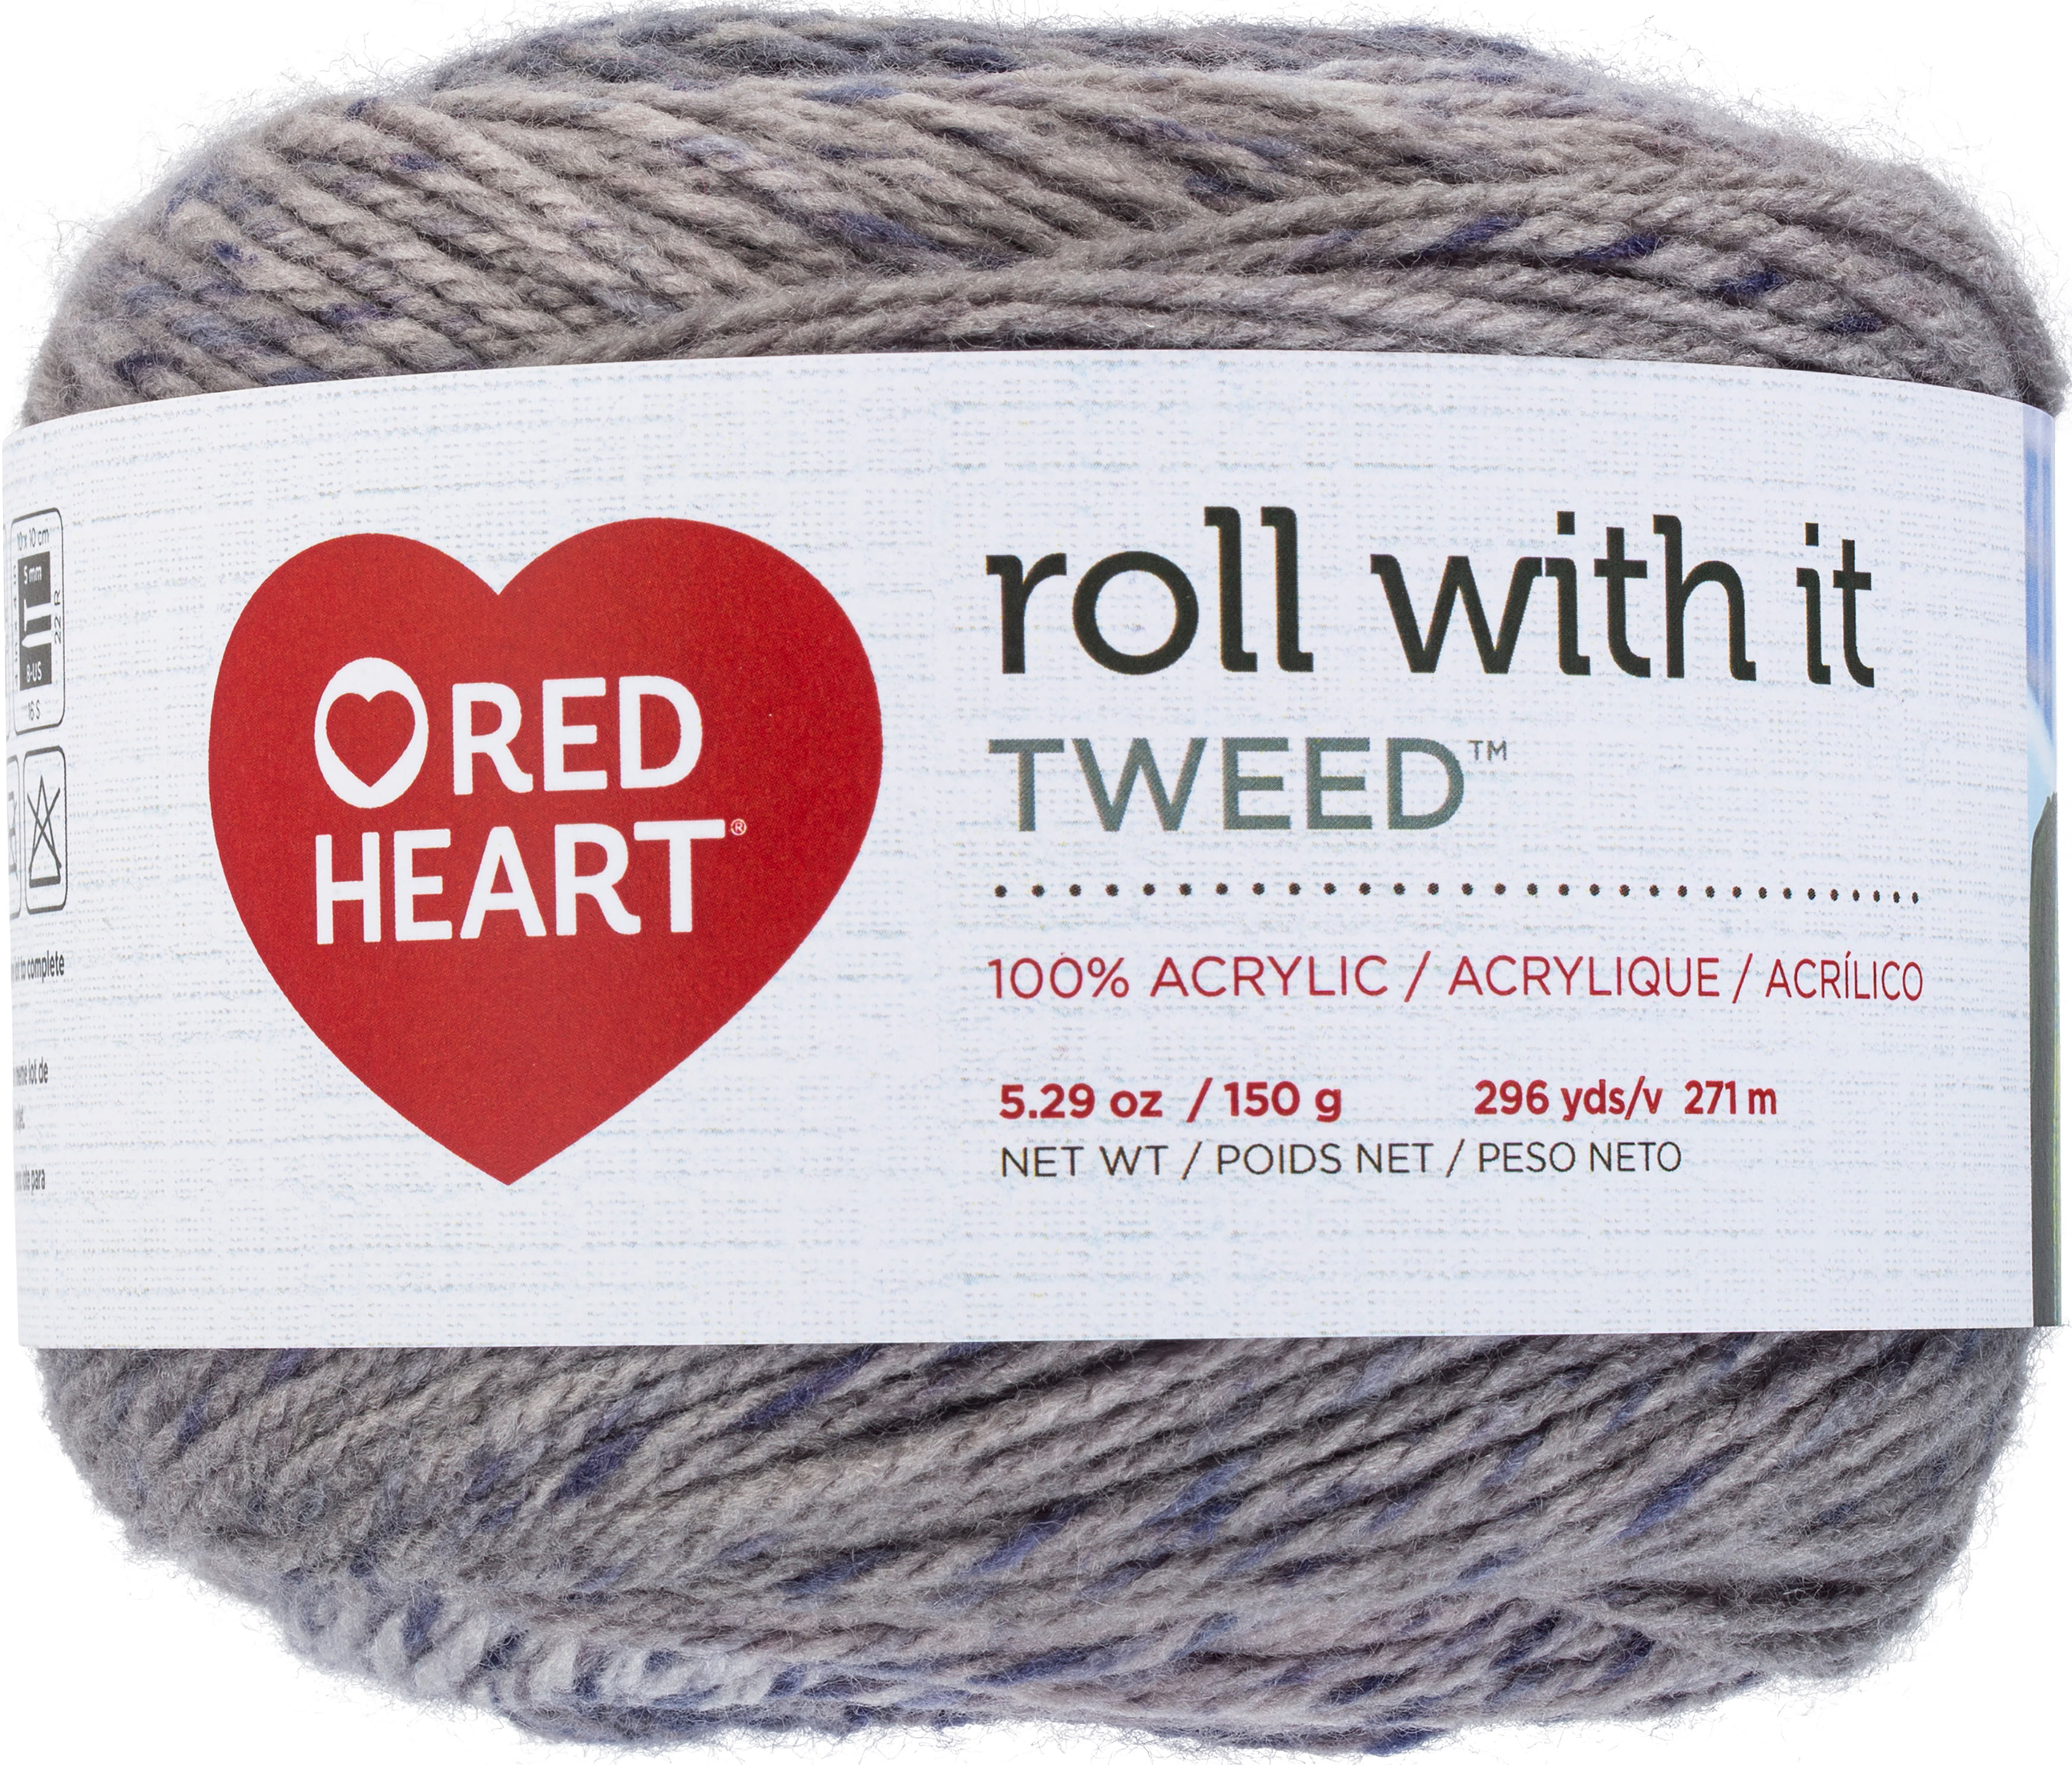 red heart roll with it tweed